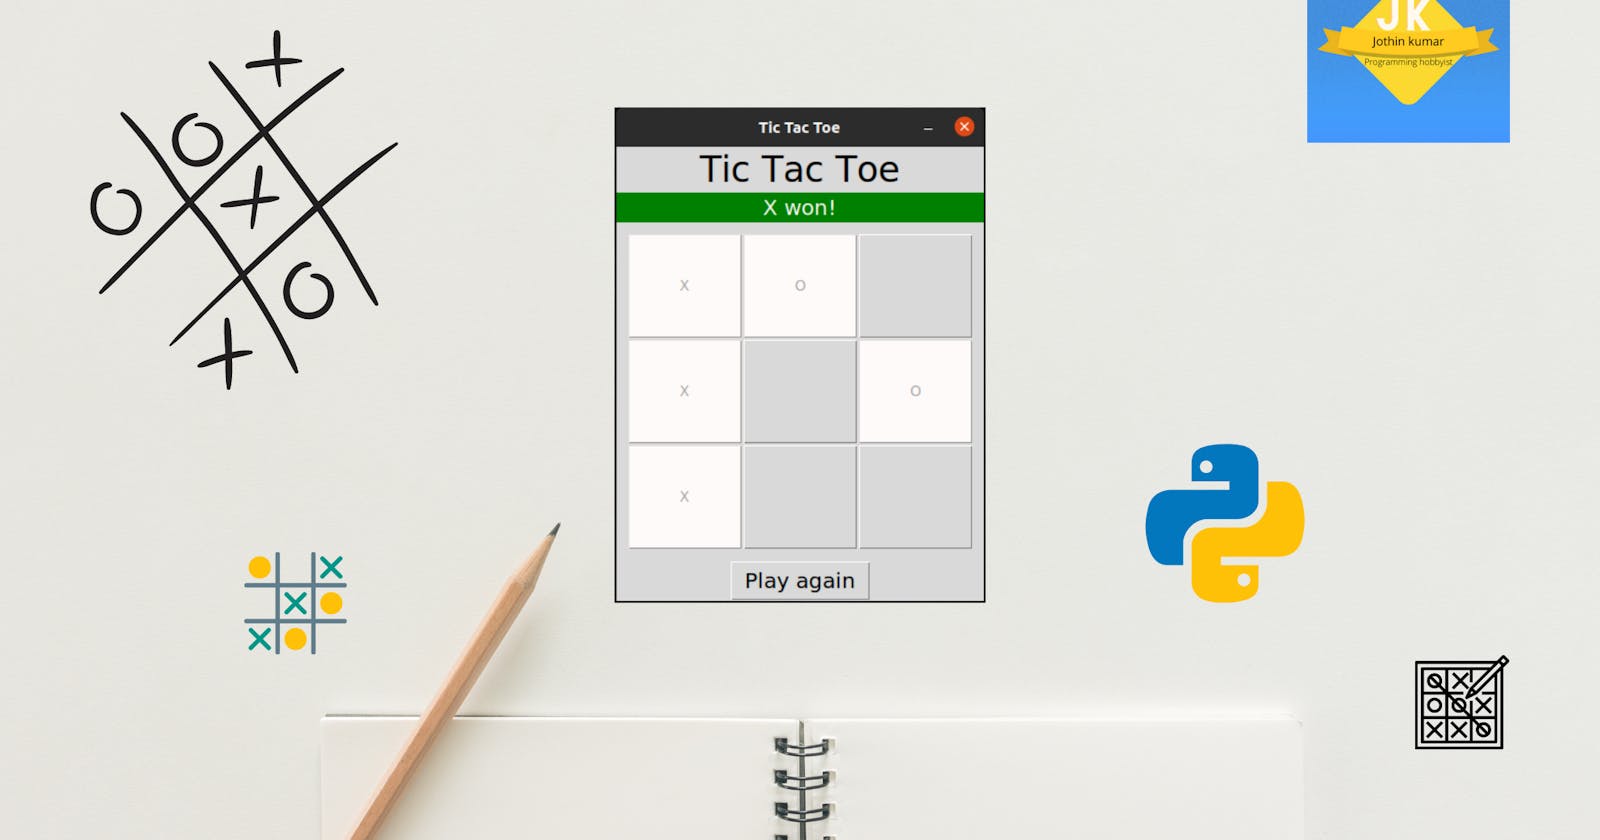 Tic Tac Toe 🎮 with Python tkinter - part 1